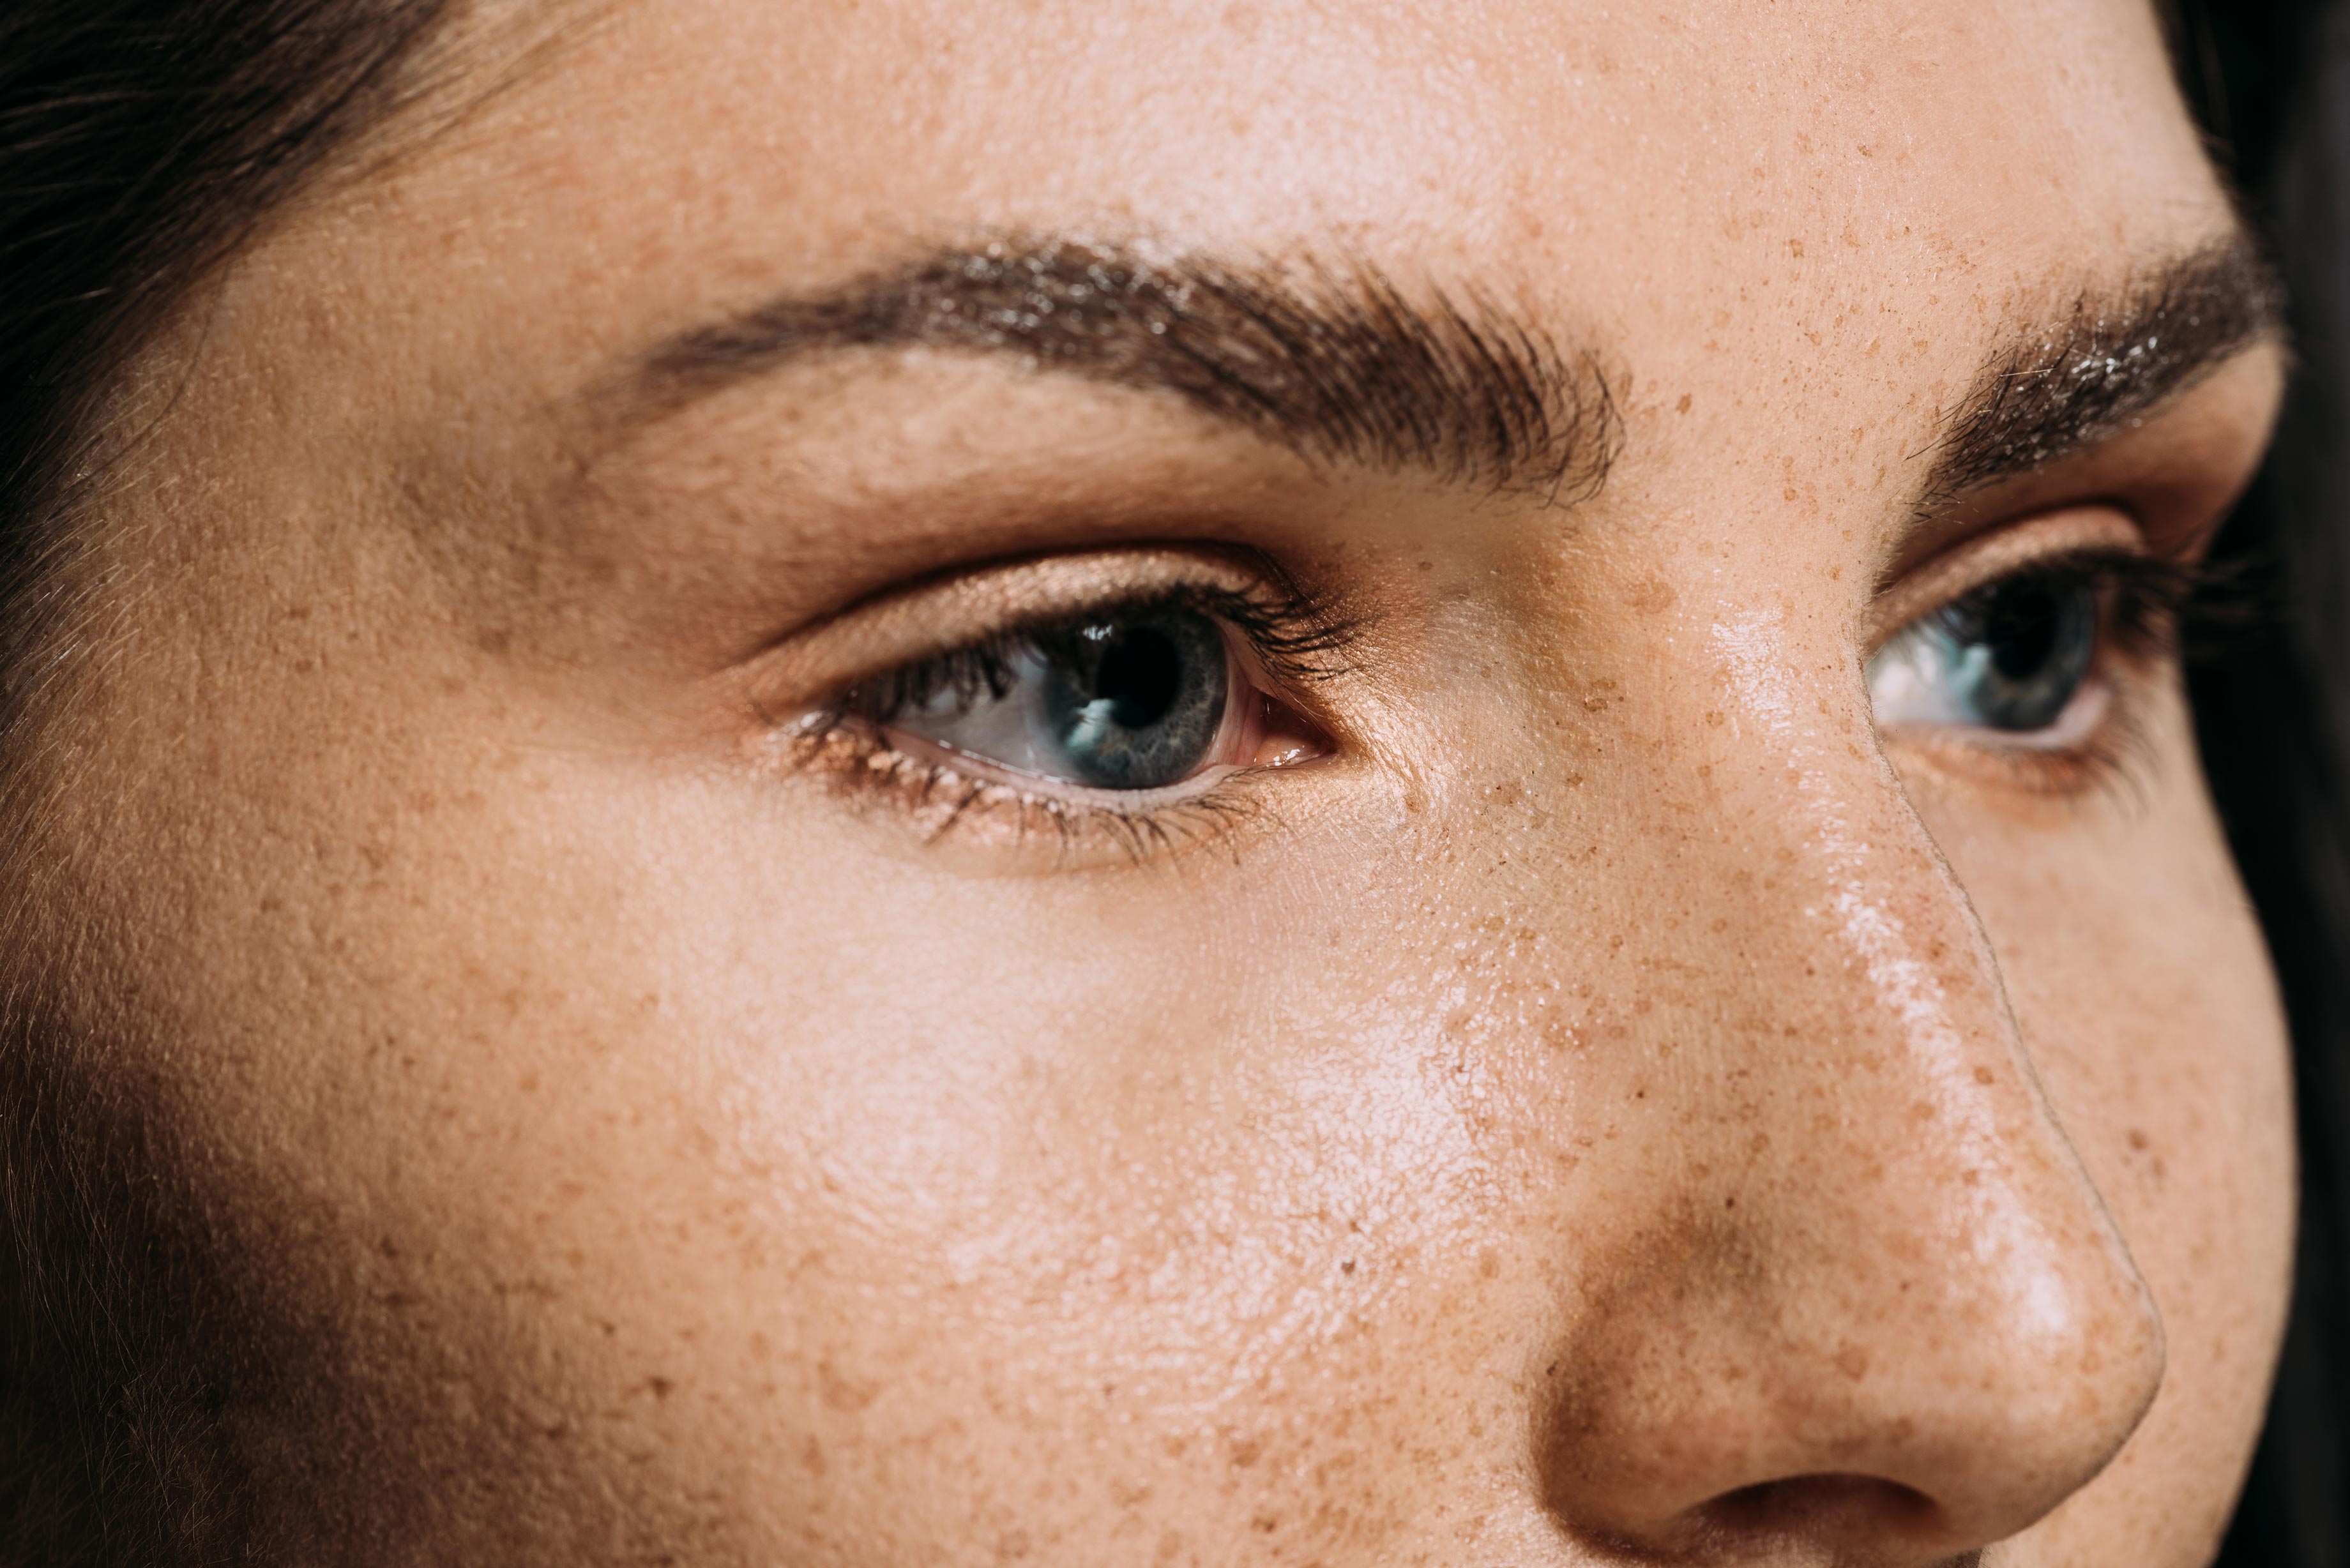 Does your skin have dark spots like this? - Skin Souffle